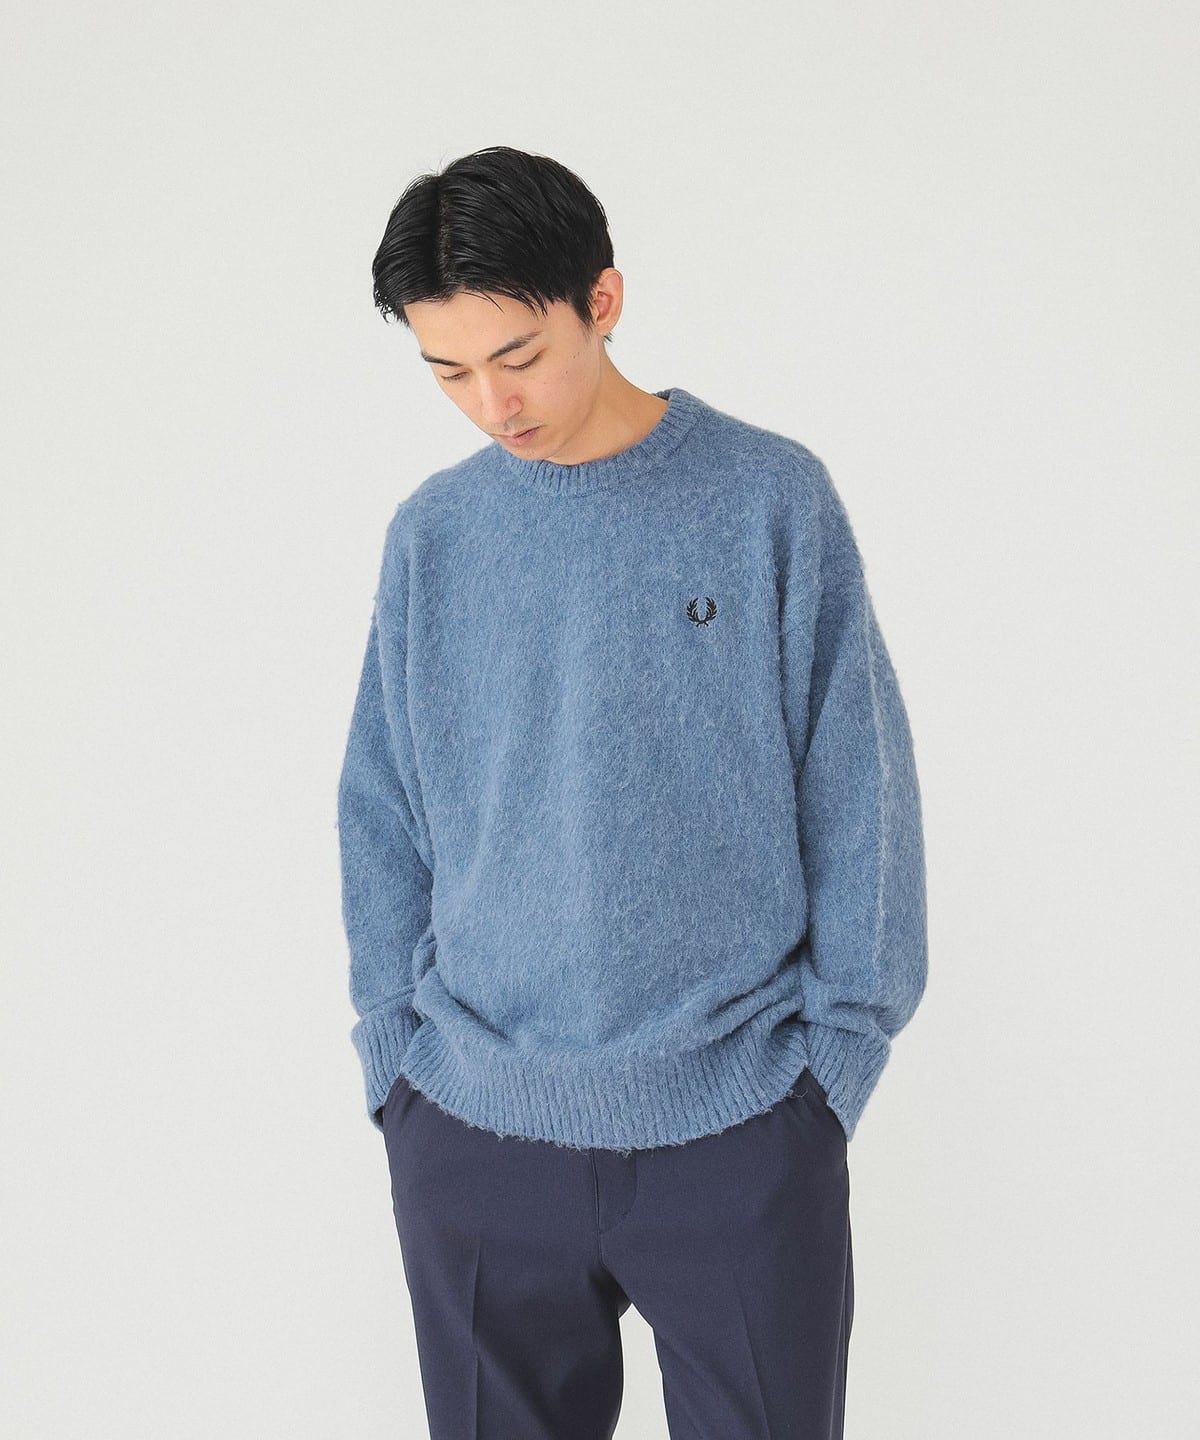 LACOSTE BEAMS 別注 スウェット FRED PERRY | mdh.com.sa